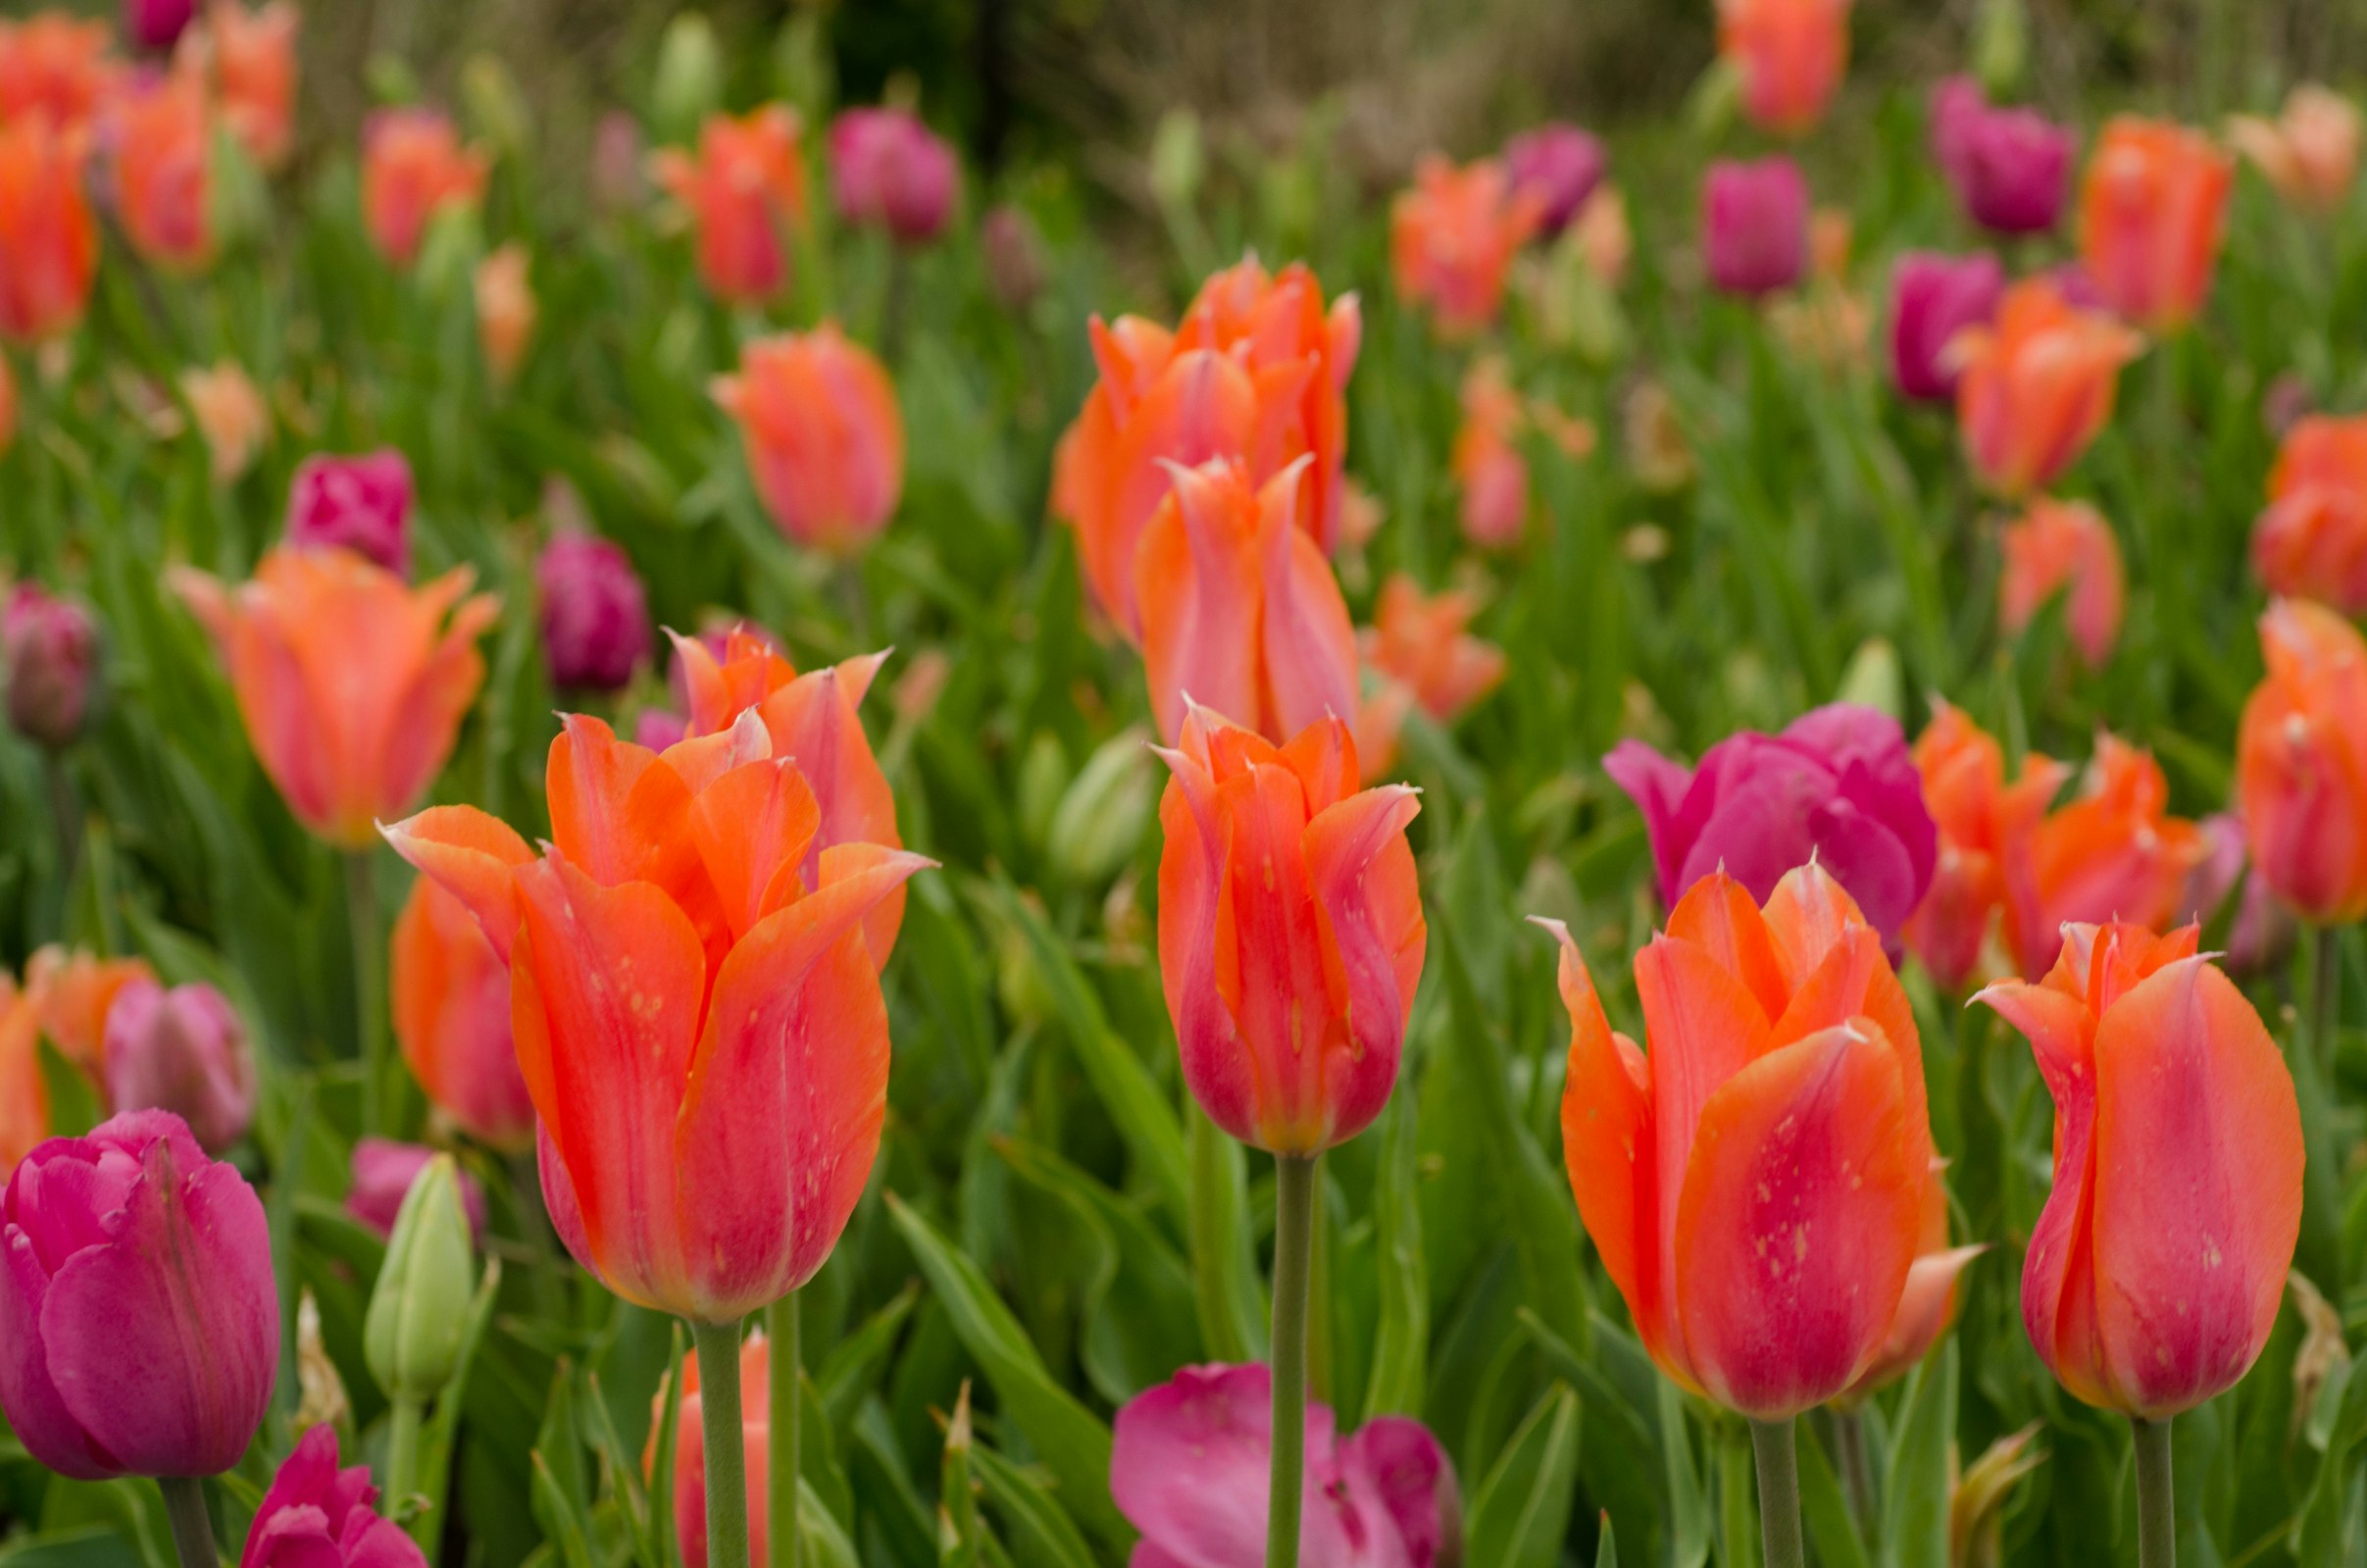 500px Photo ID: 104144573 - Visit Cheekwood for the tulips